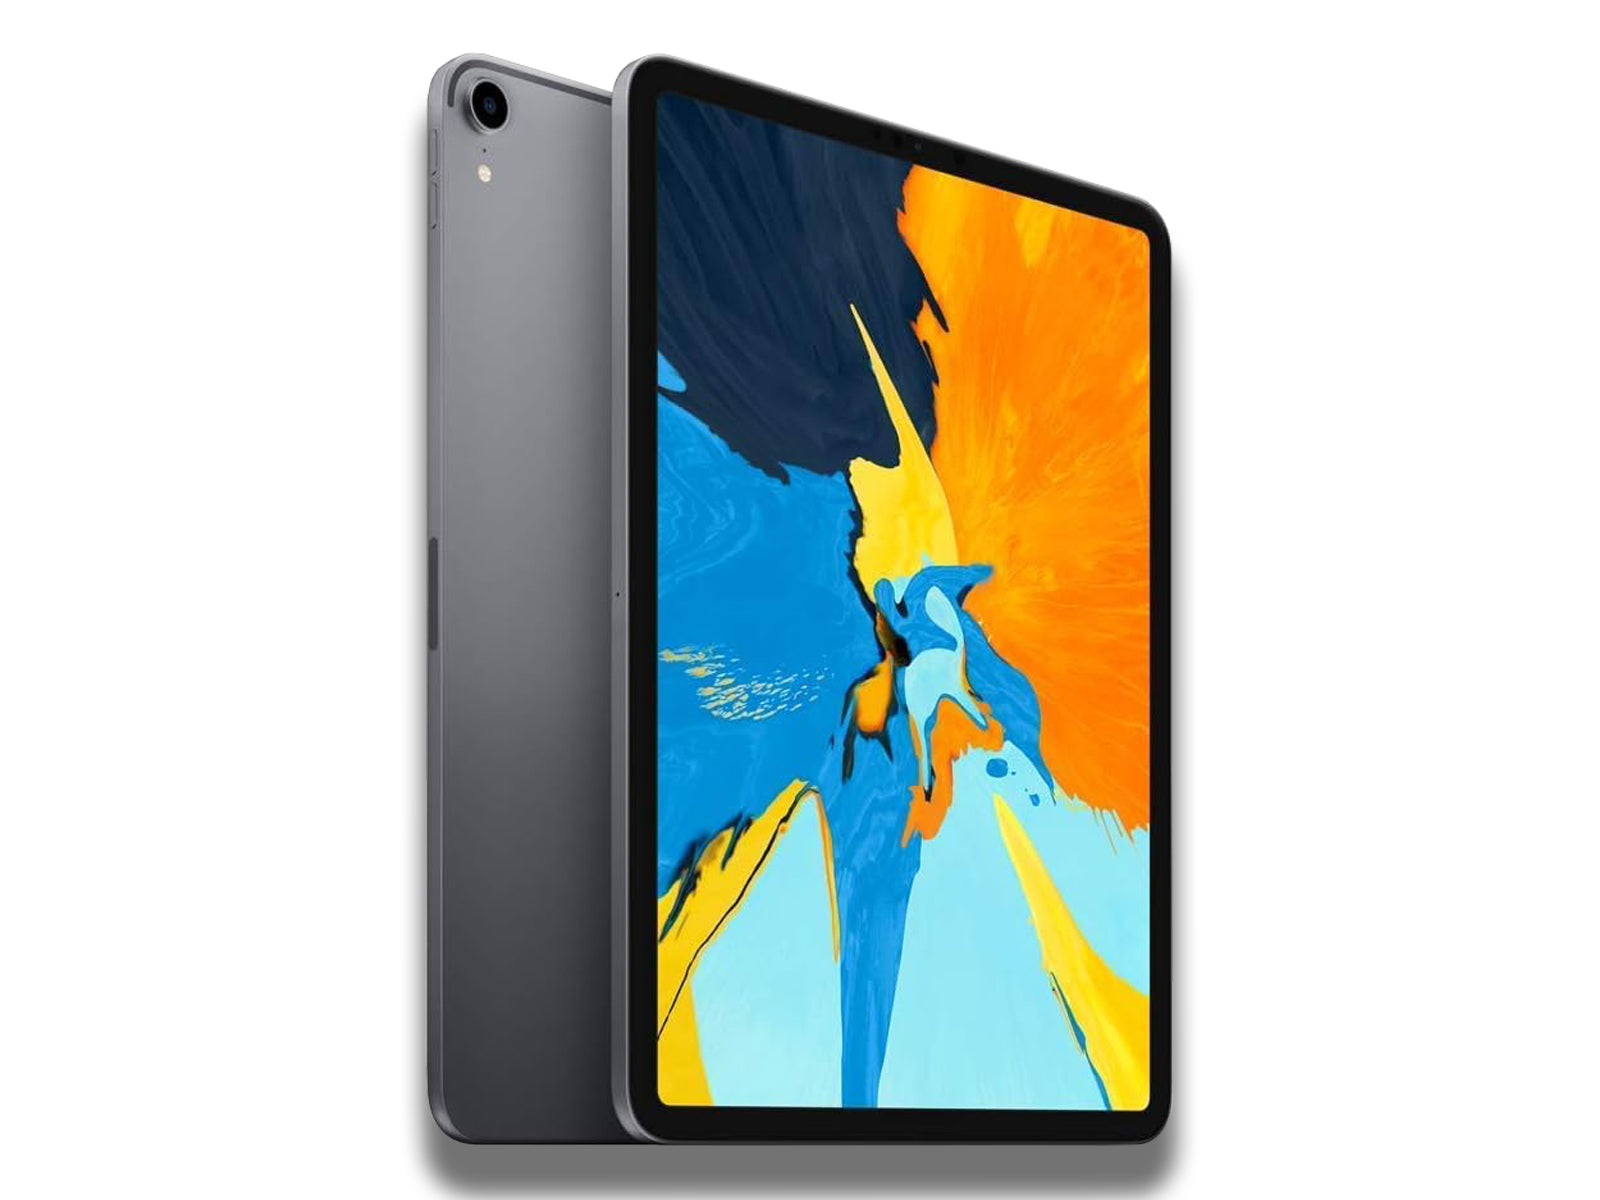 Image shows an angled view of the space grey Apple iPad Pro 11-inch 1st Generation 